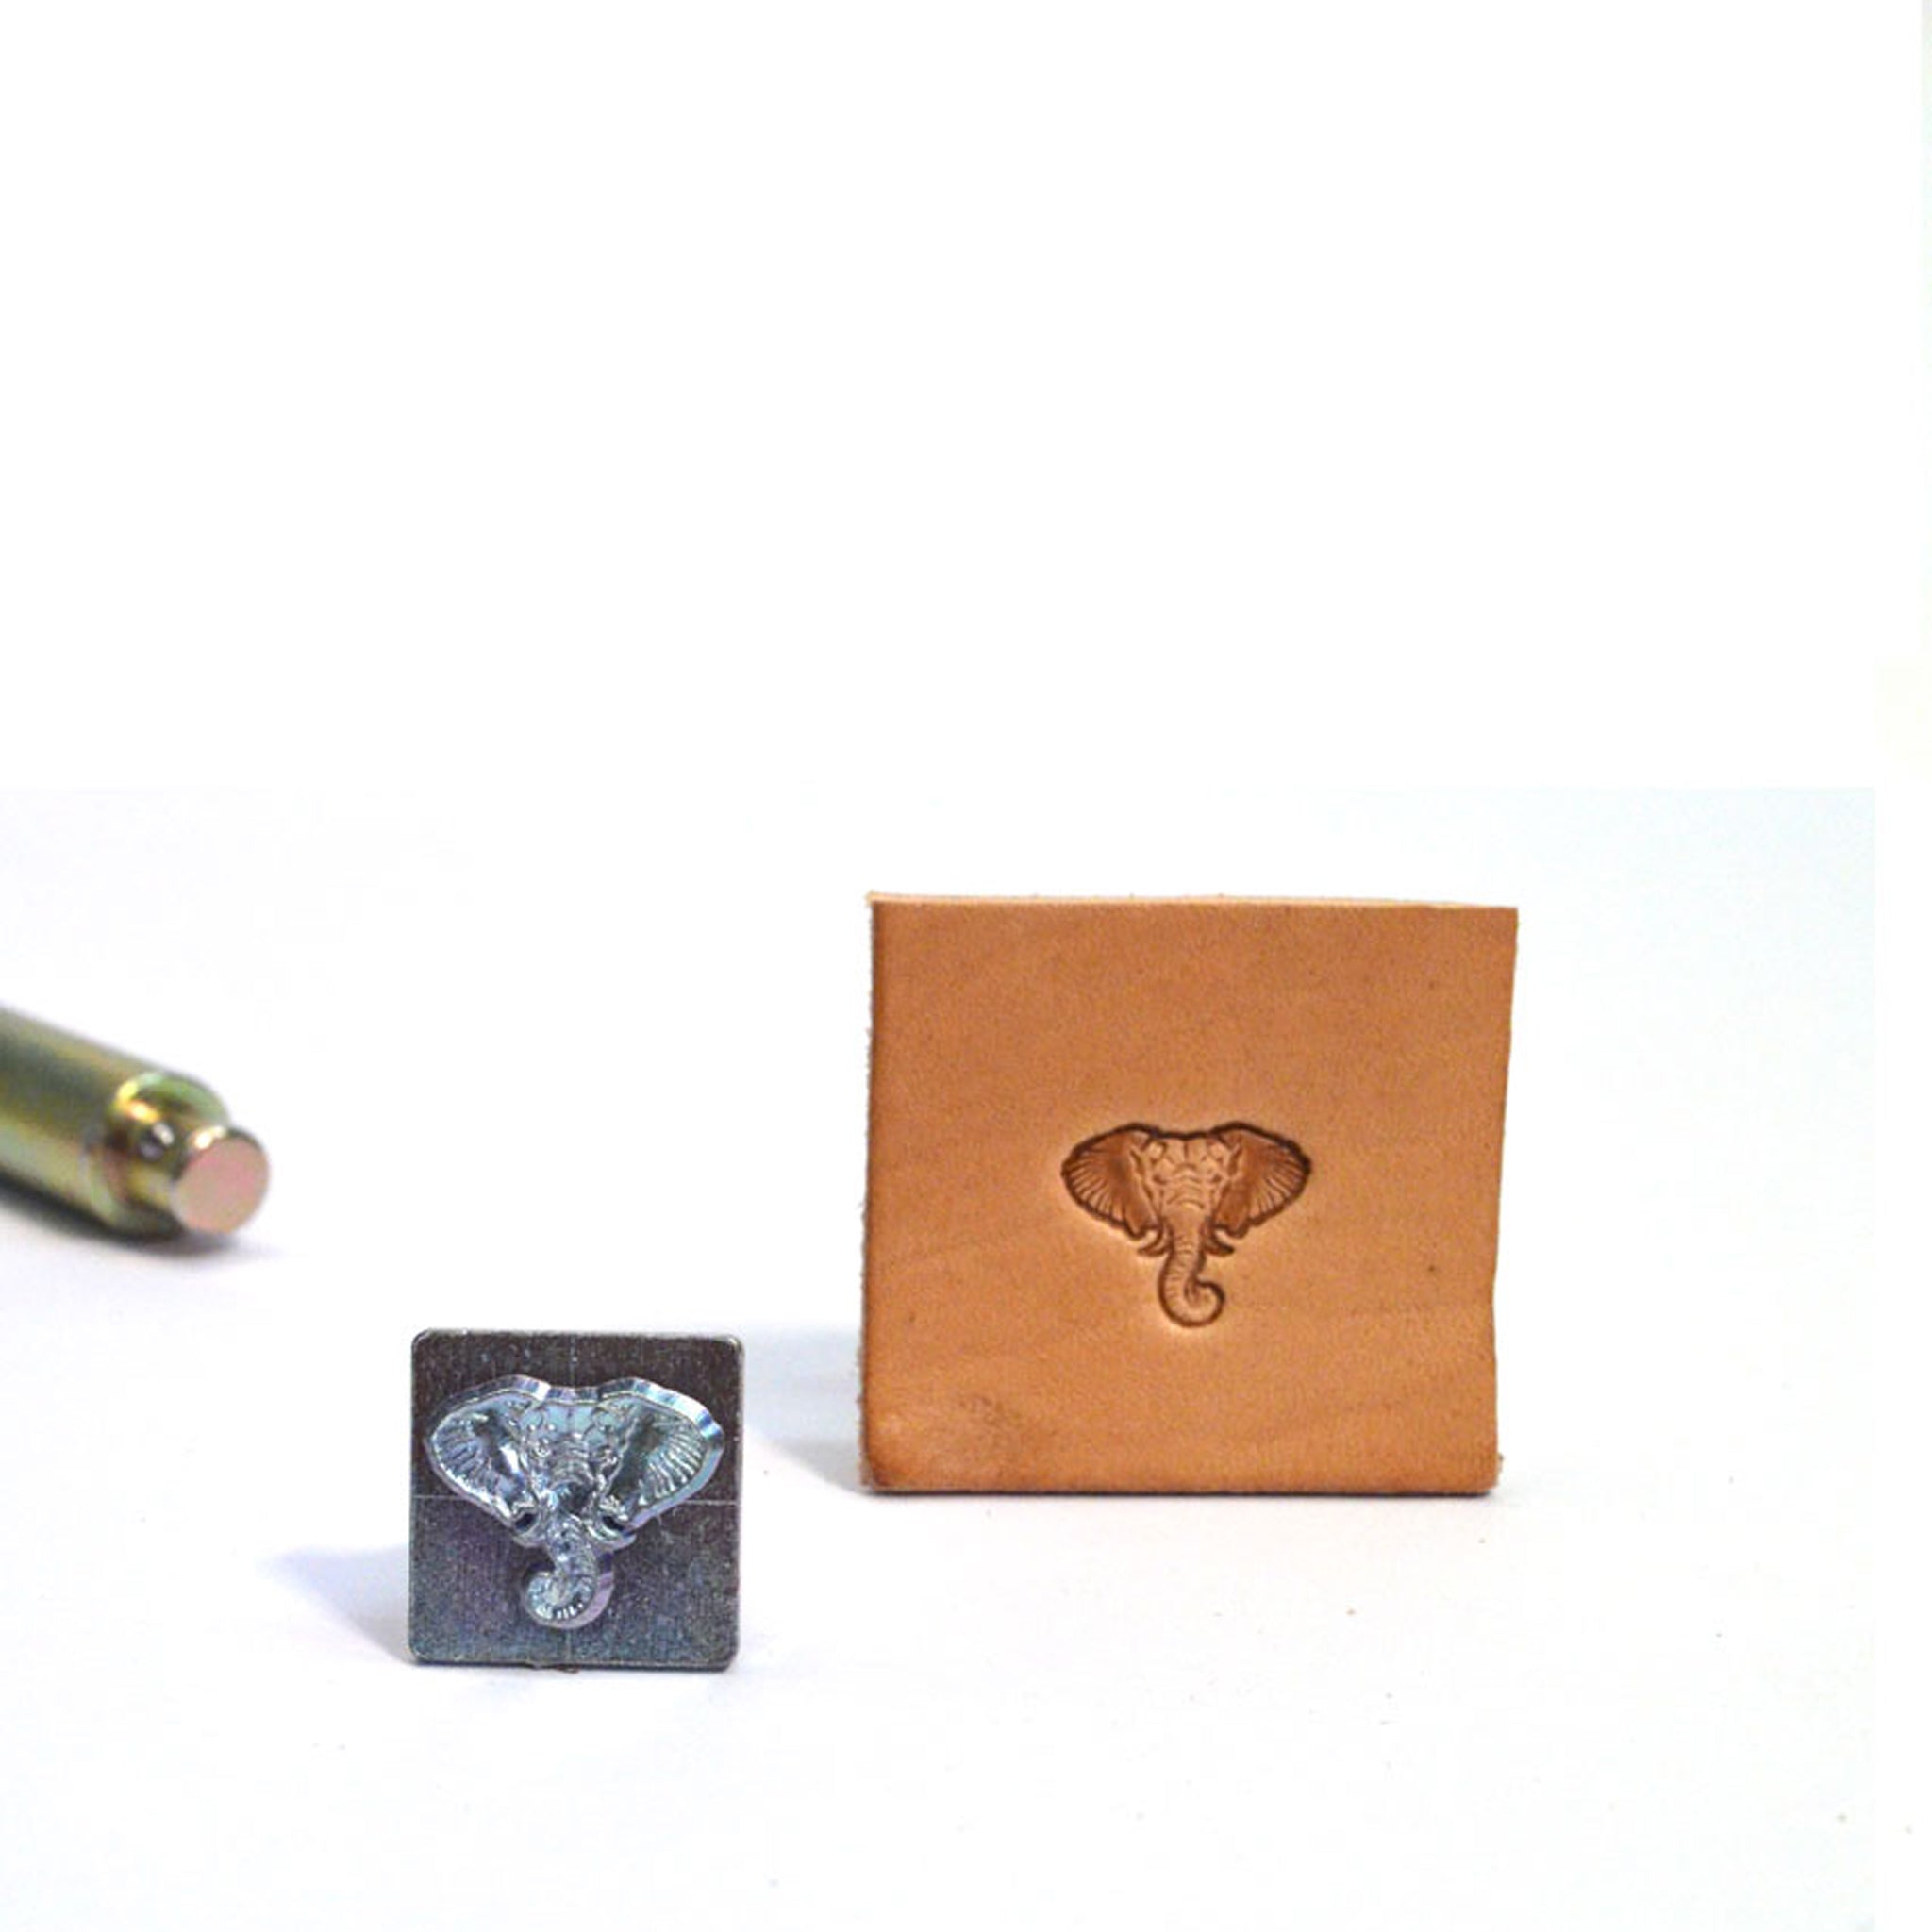 Elephant Mini 3D Embossing Stamp from Identity Leathercraft